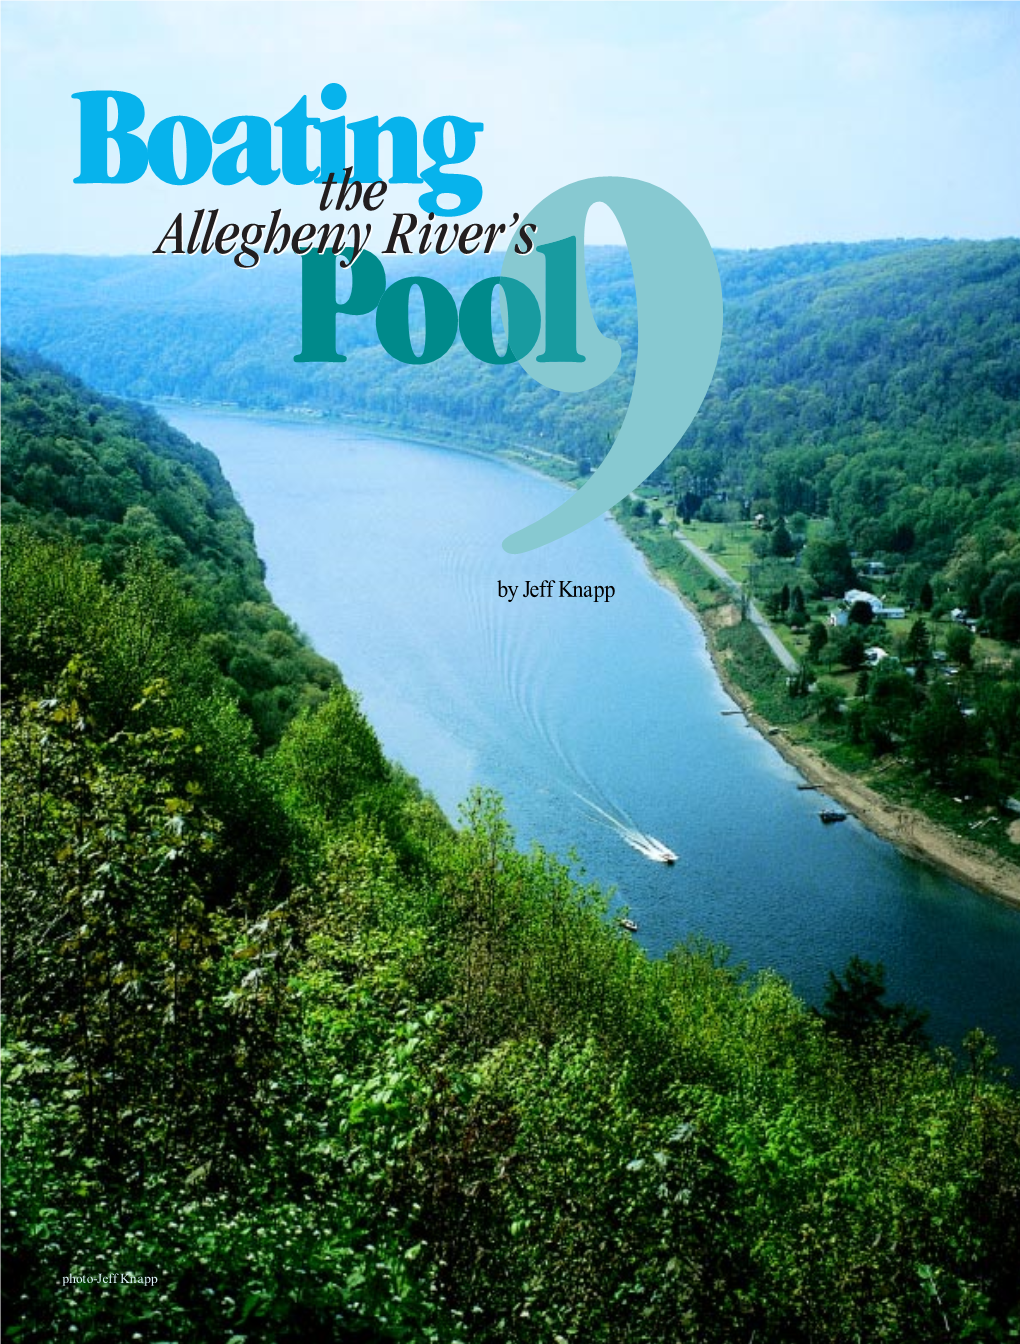 Boating the Allegheny River's Pool 9 by Jeff Knapp